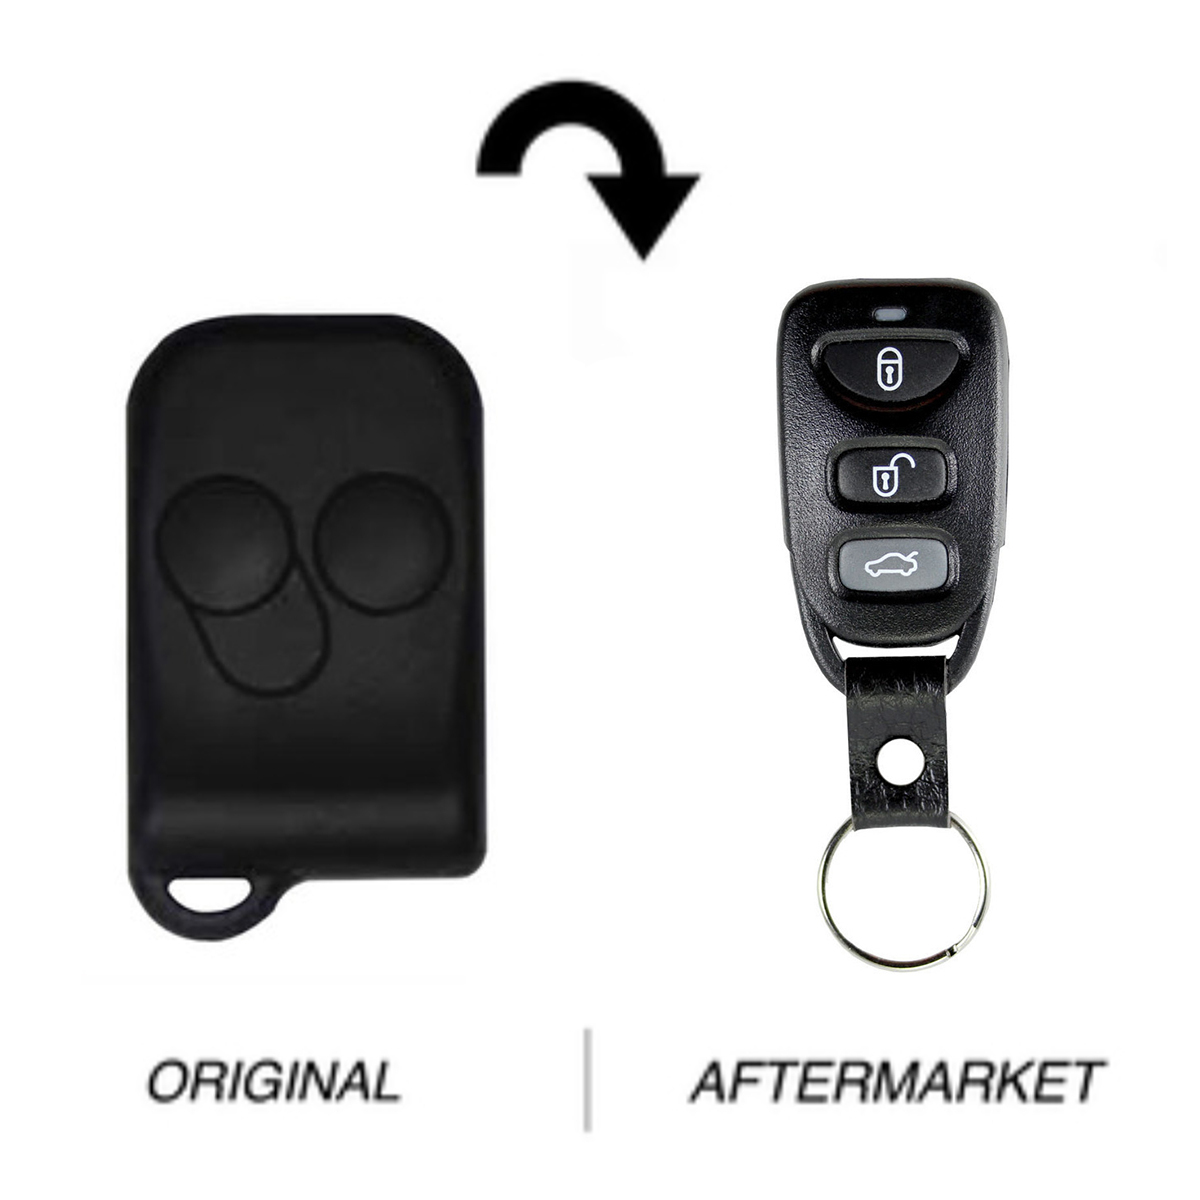 Ford compatible remote, 304MHz to suit Falcon EB,ED,EF,EL,NC and AU1